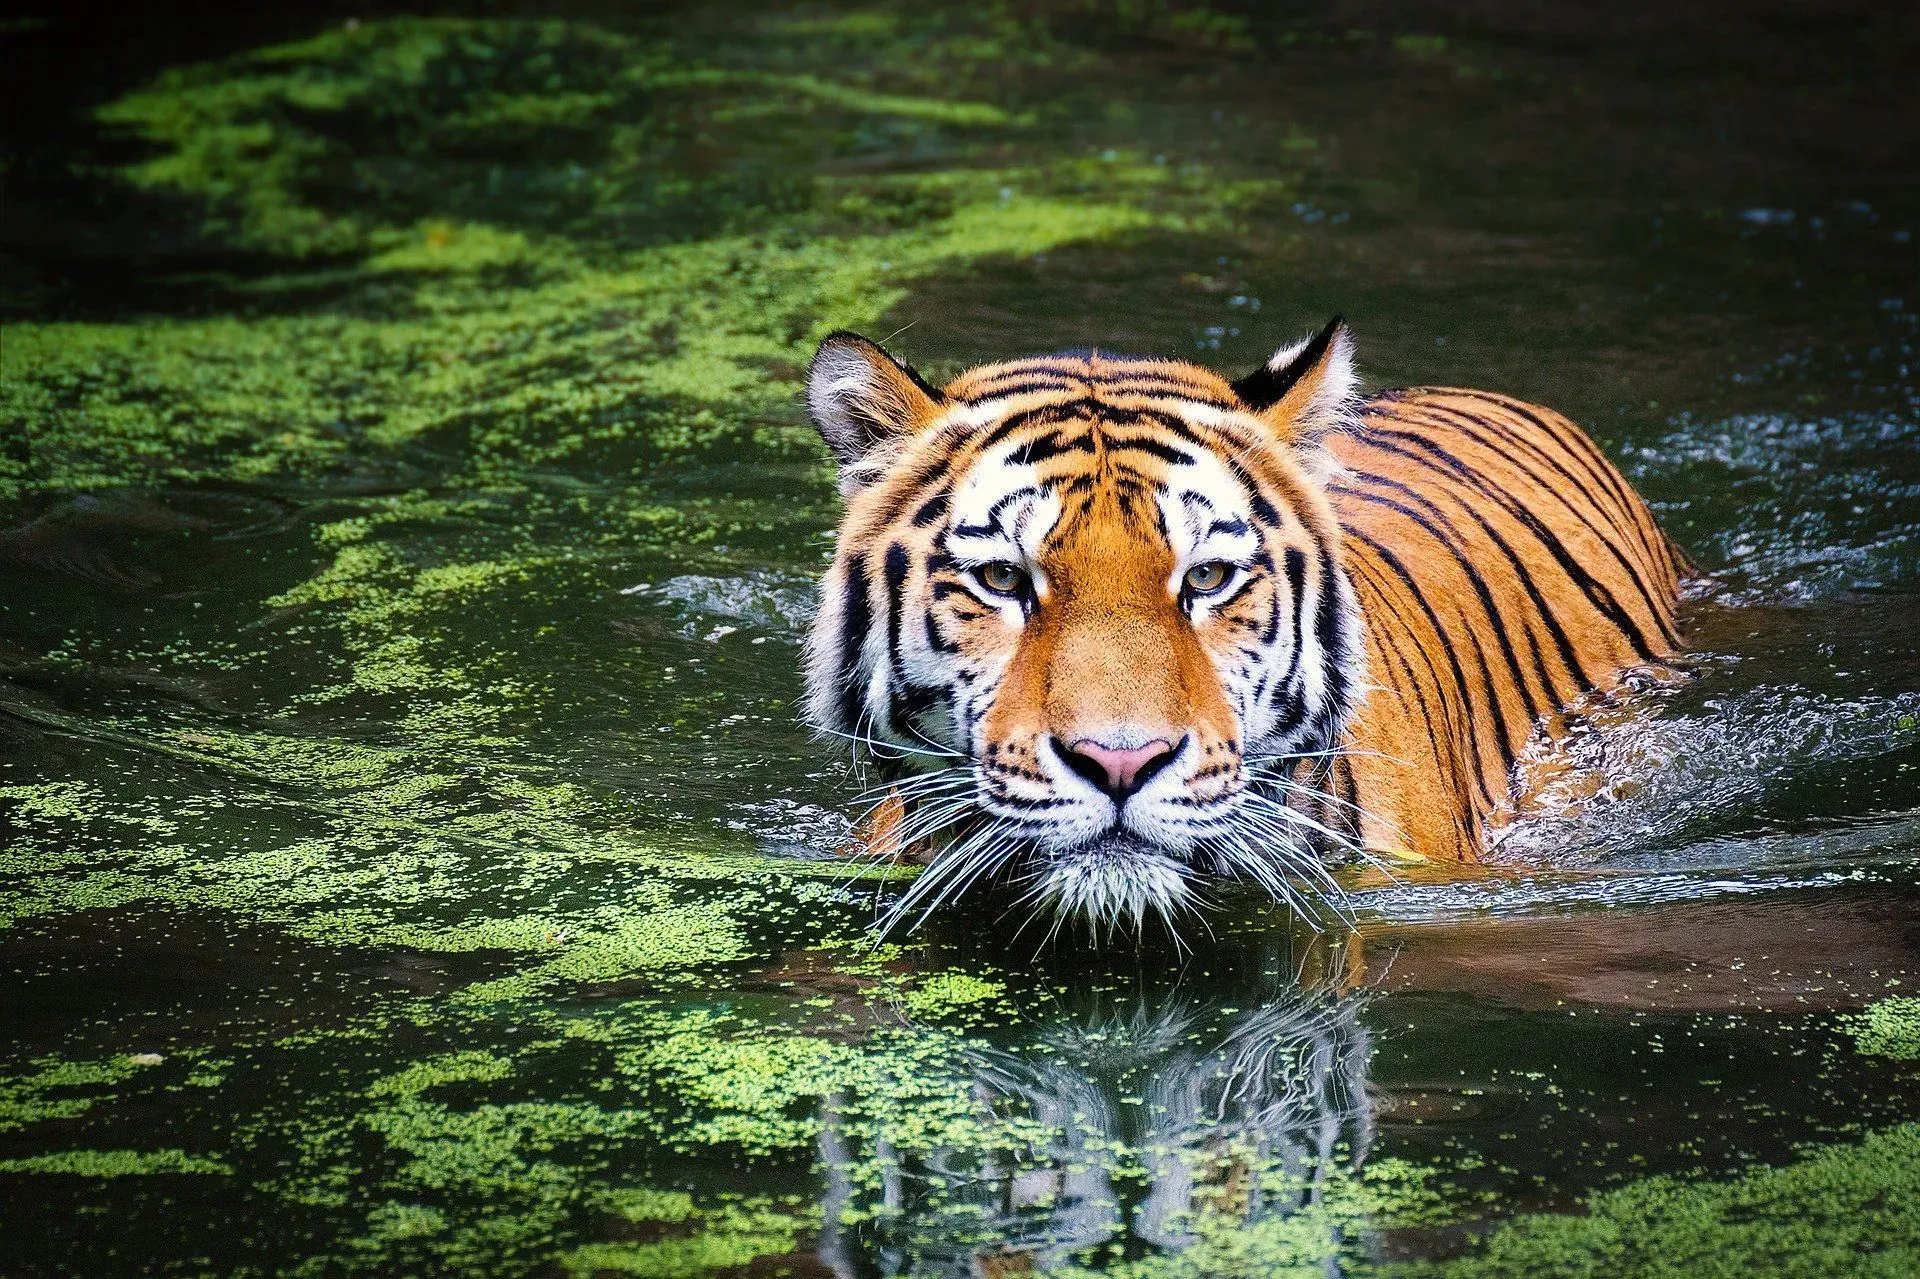 Most travelers want to know, are there tigers in Africa?